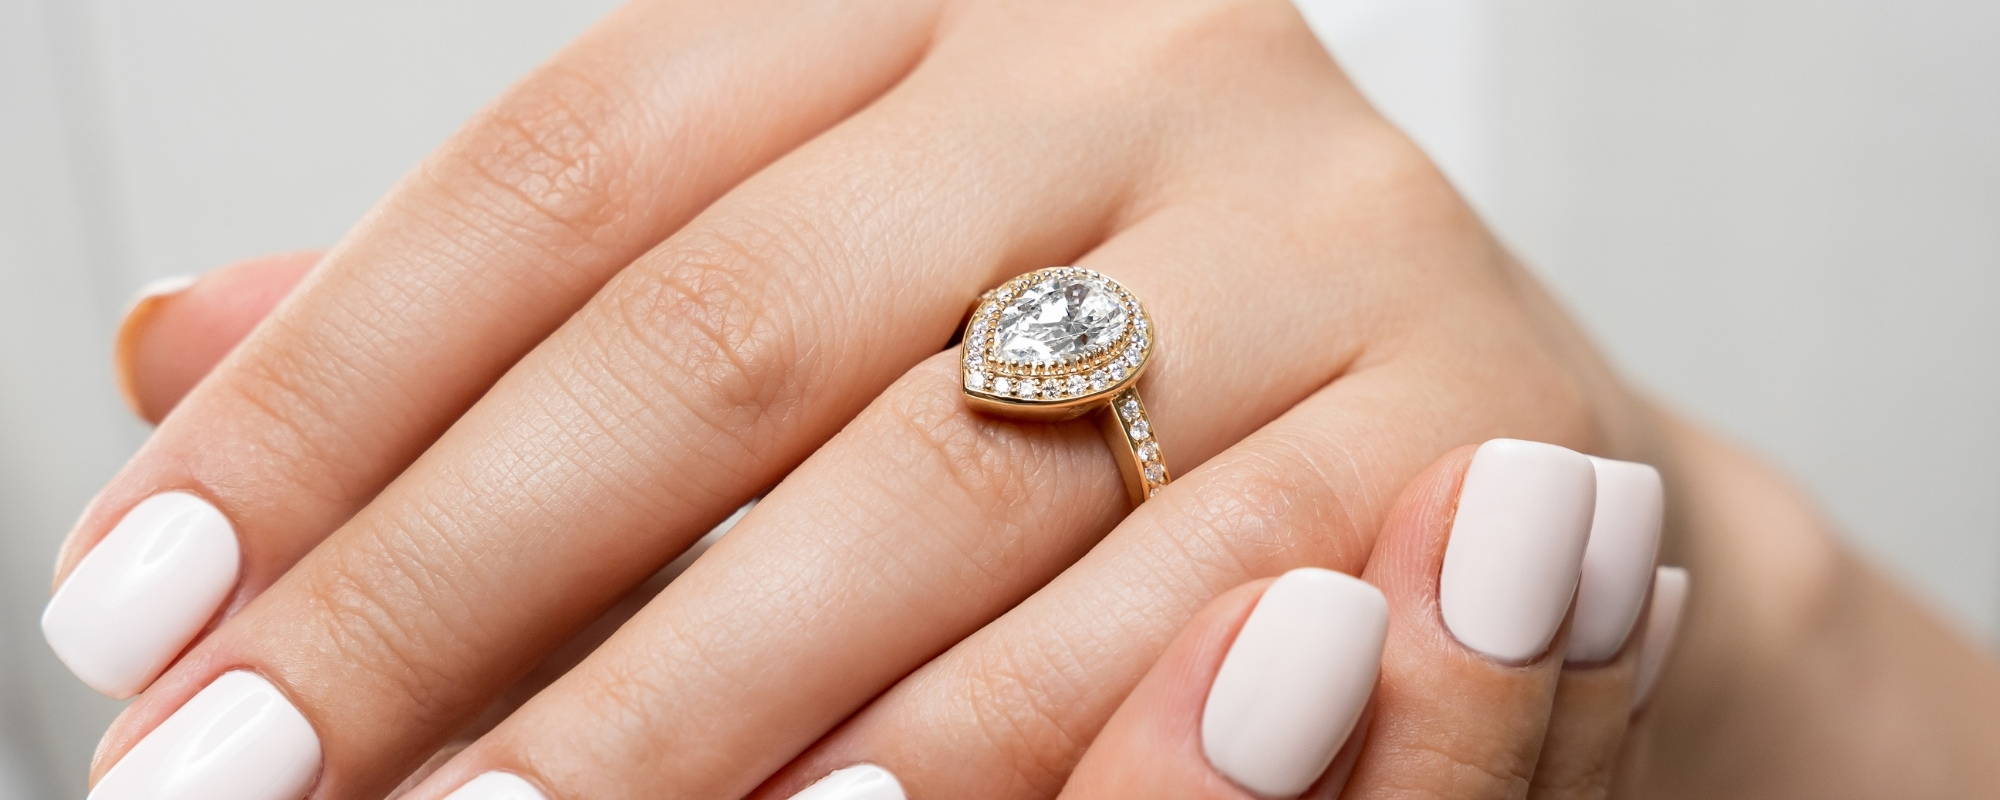 Can You Spot The Most Expensive Engagement Ring?